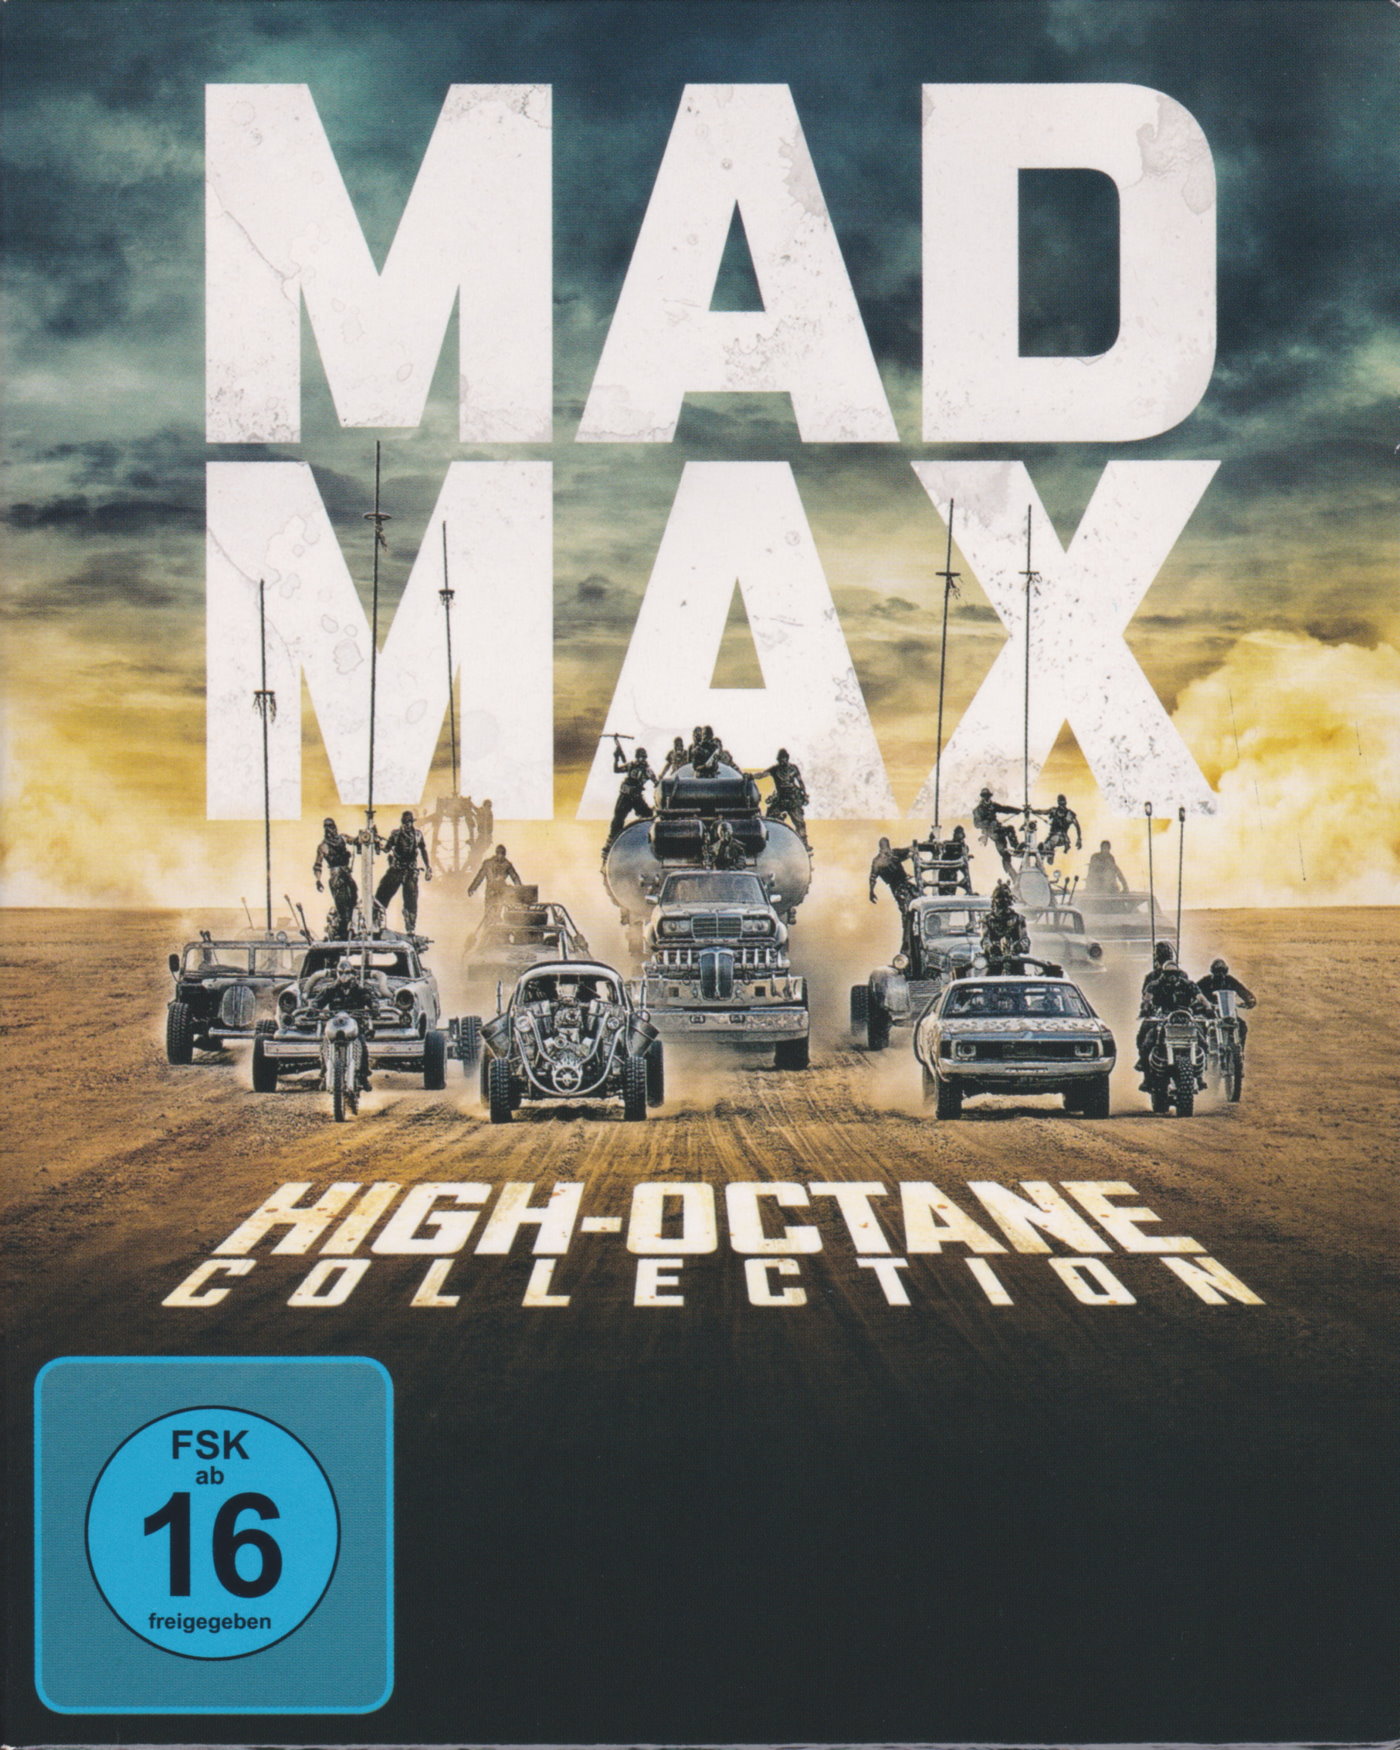 Cover - Mad Max.jpg